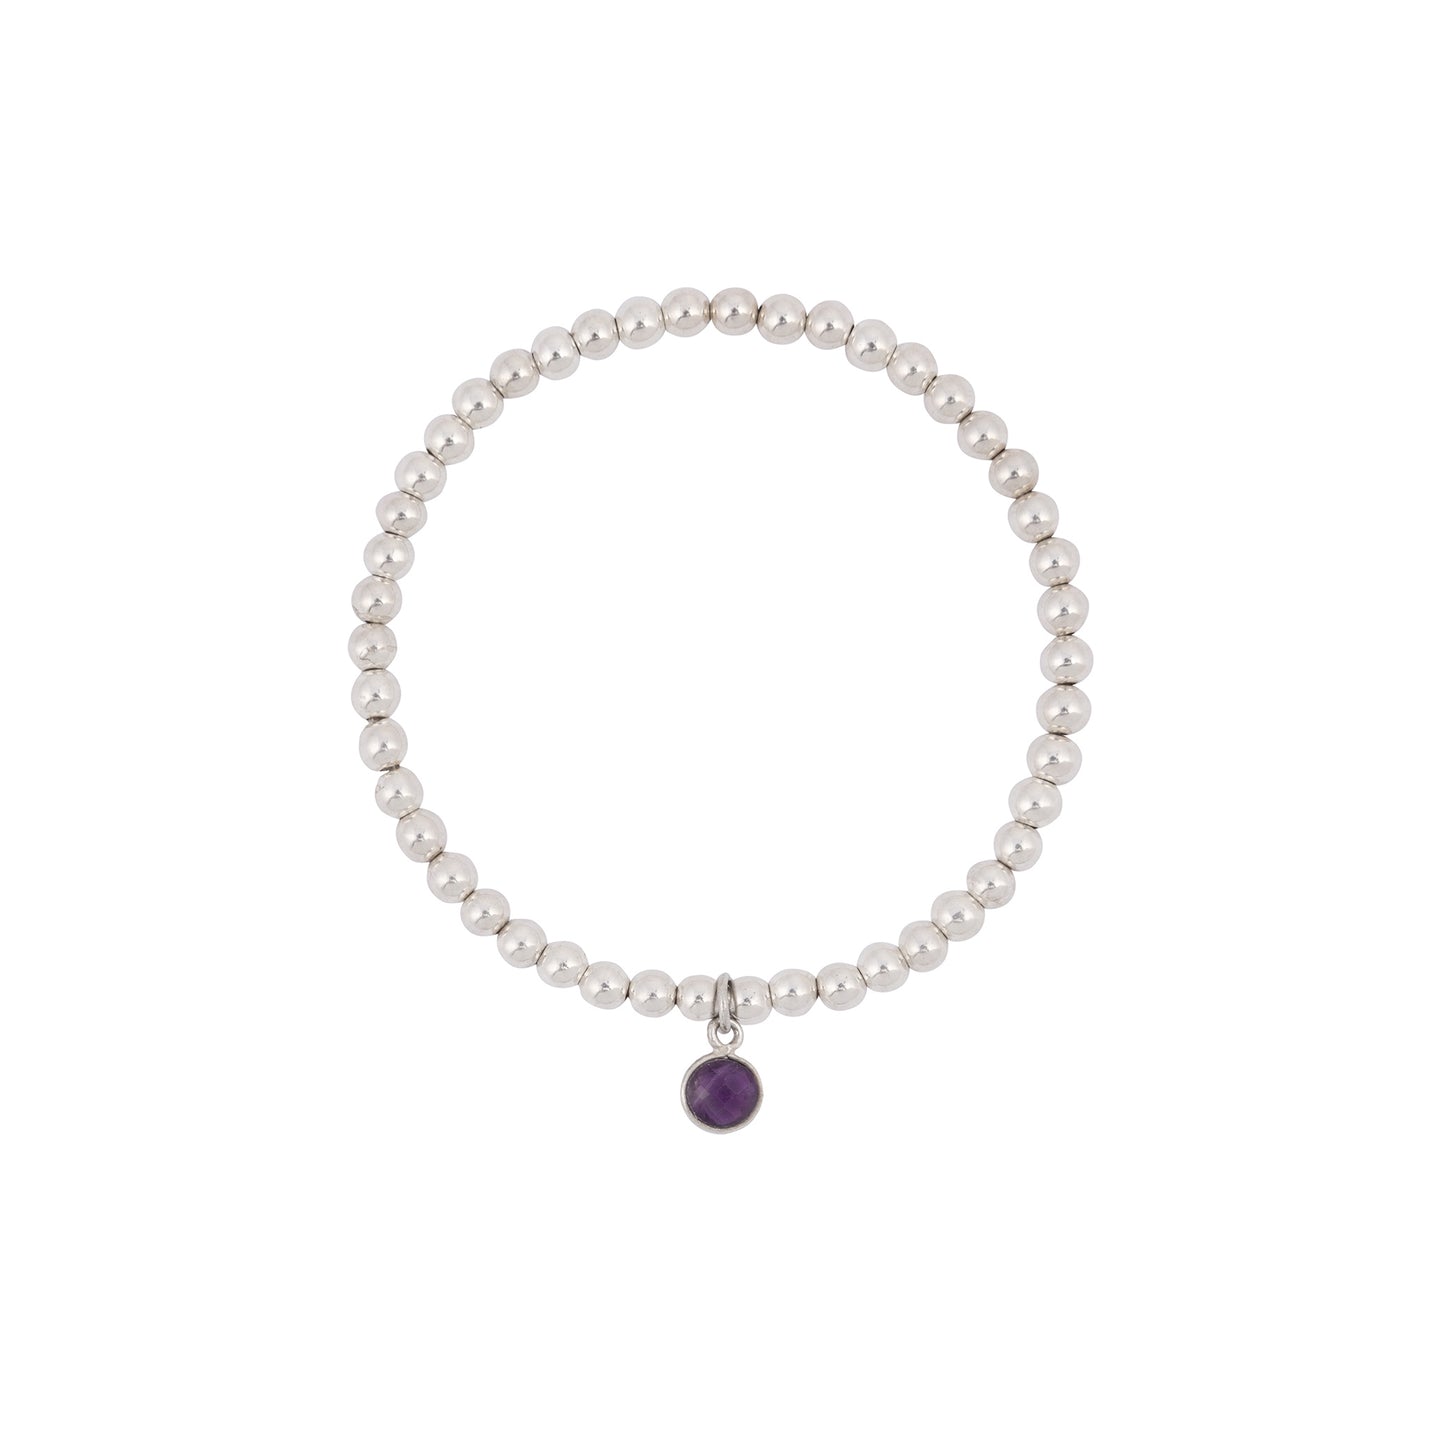 A delicate Amethyst Birthstone Bracelet from Made Here with Love features sterling silver beads with a round, purple gemstone charm hanging from it. The uniformly sized beads create a simple and elegant circle, while the February birthstone adds a vibrant pop of color to its minimalist design.